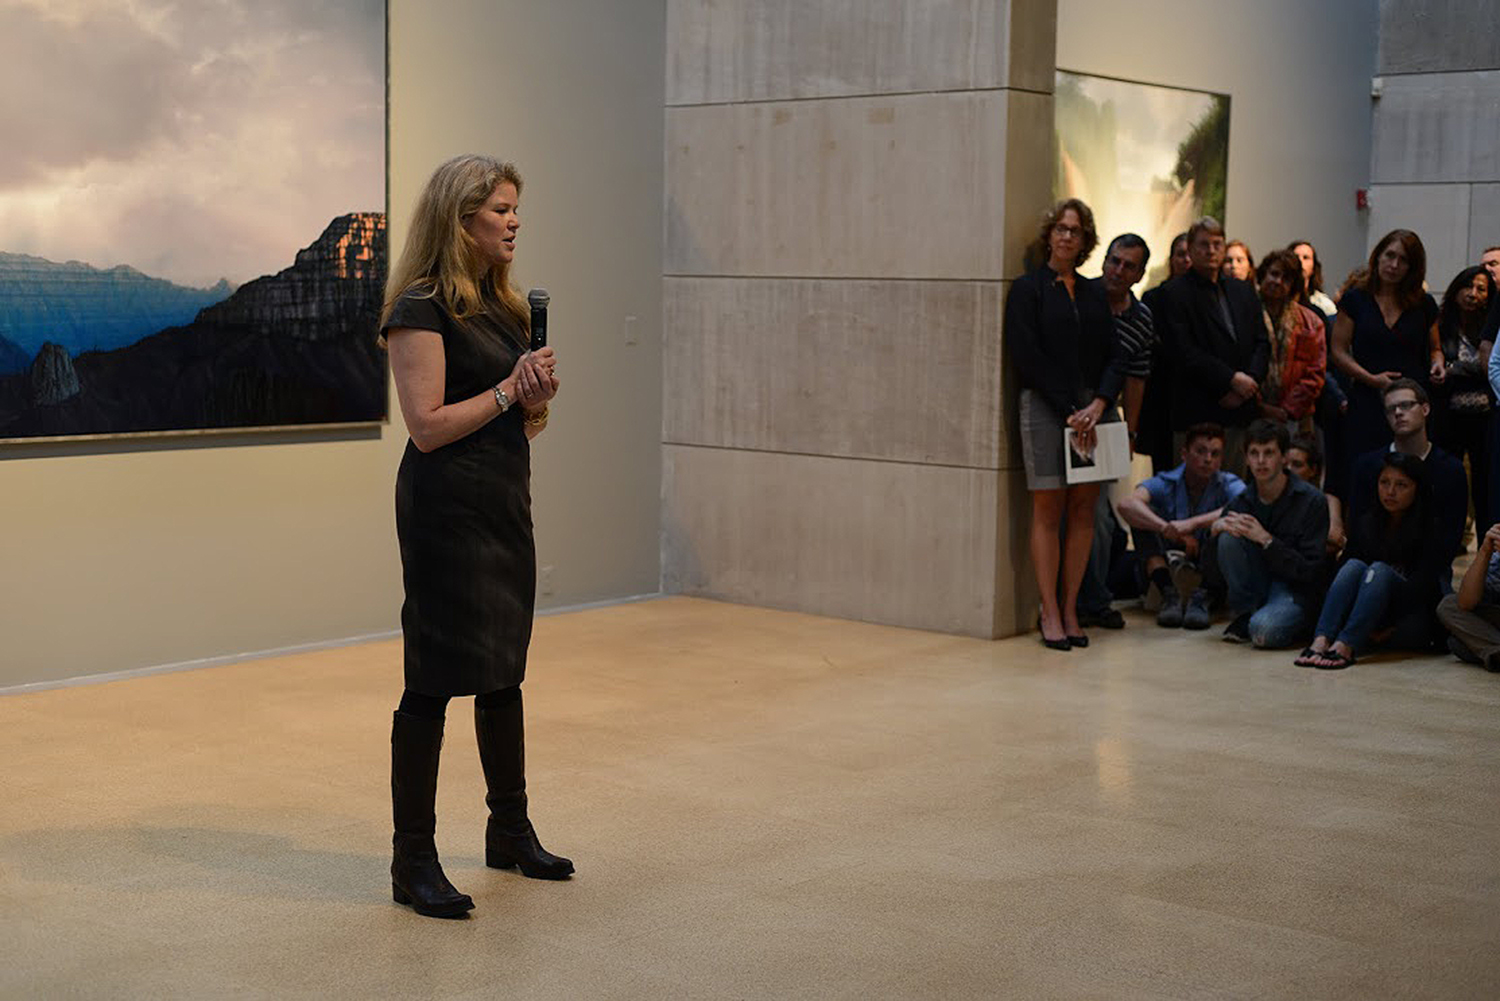 On Sept. 16, Professor of Art Tula Telfair spoke about her new landscape paintings which are on display through Dec. 7 in the Ezra and Cecile Zilkha Gallery.